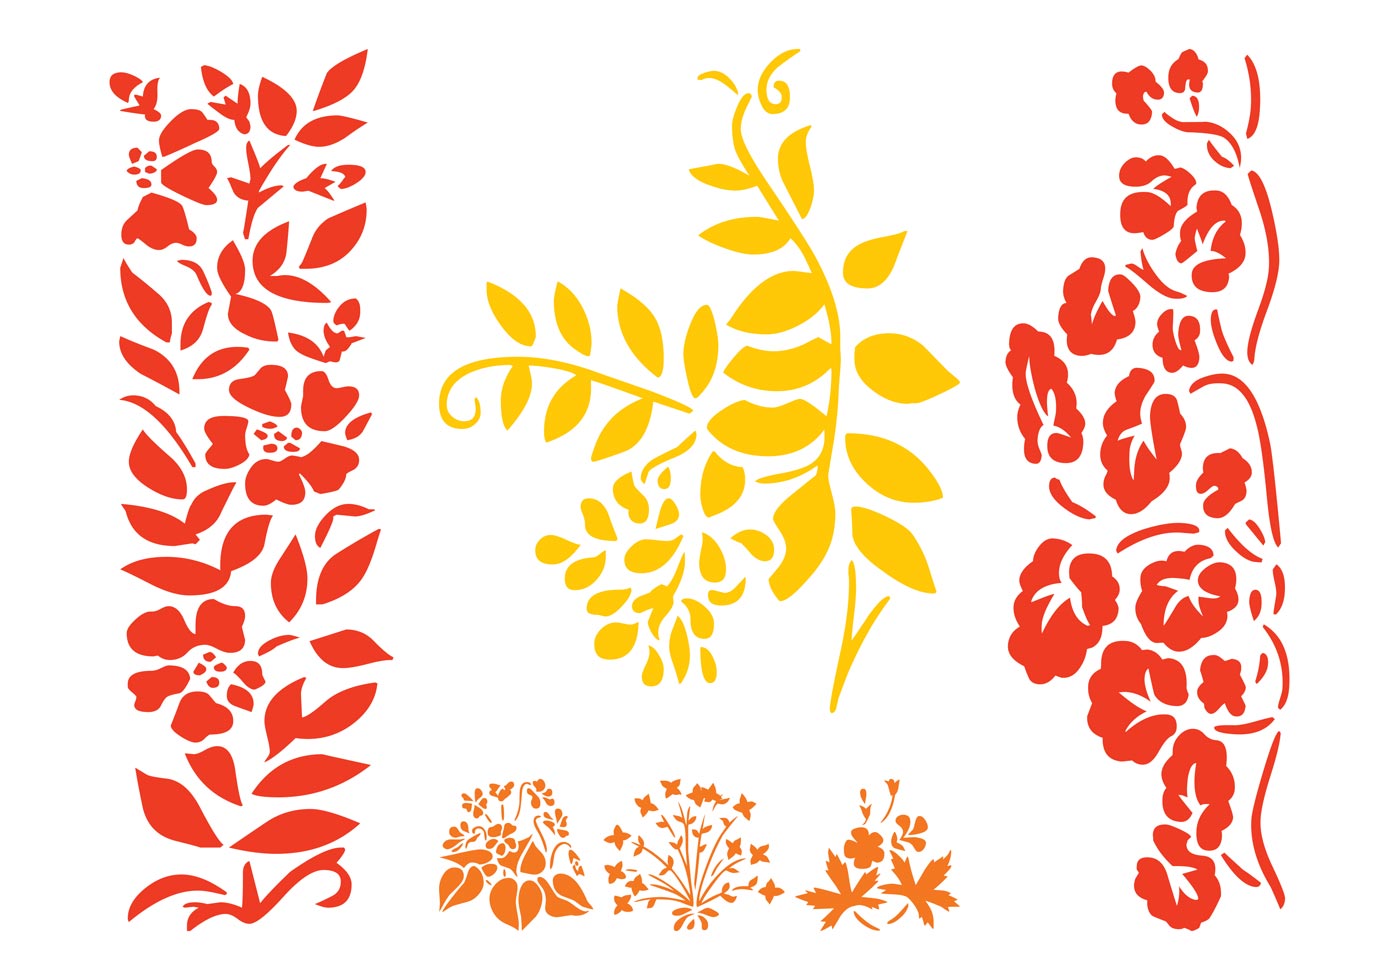 Flower Silhouettes Set - Download Free Vector Art, Stock ...